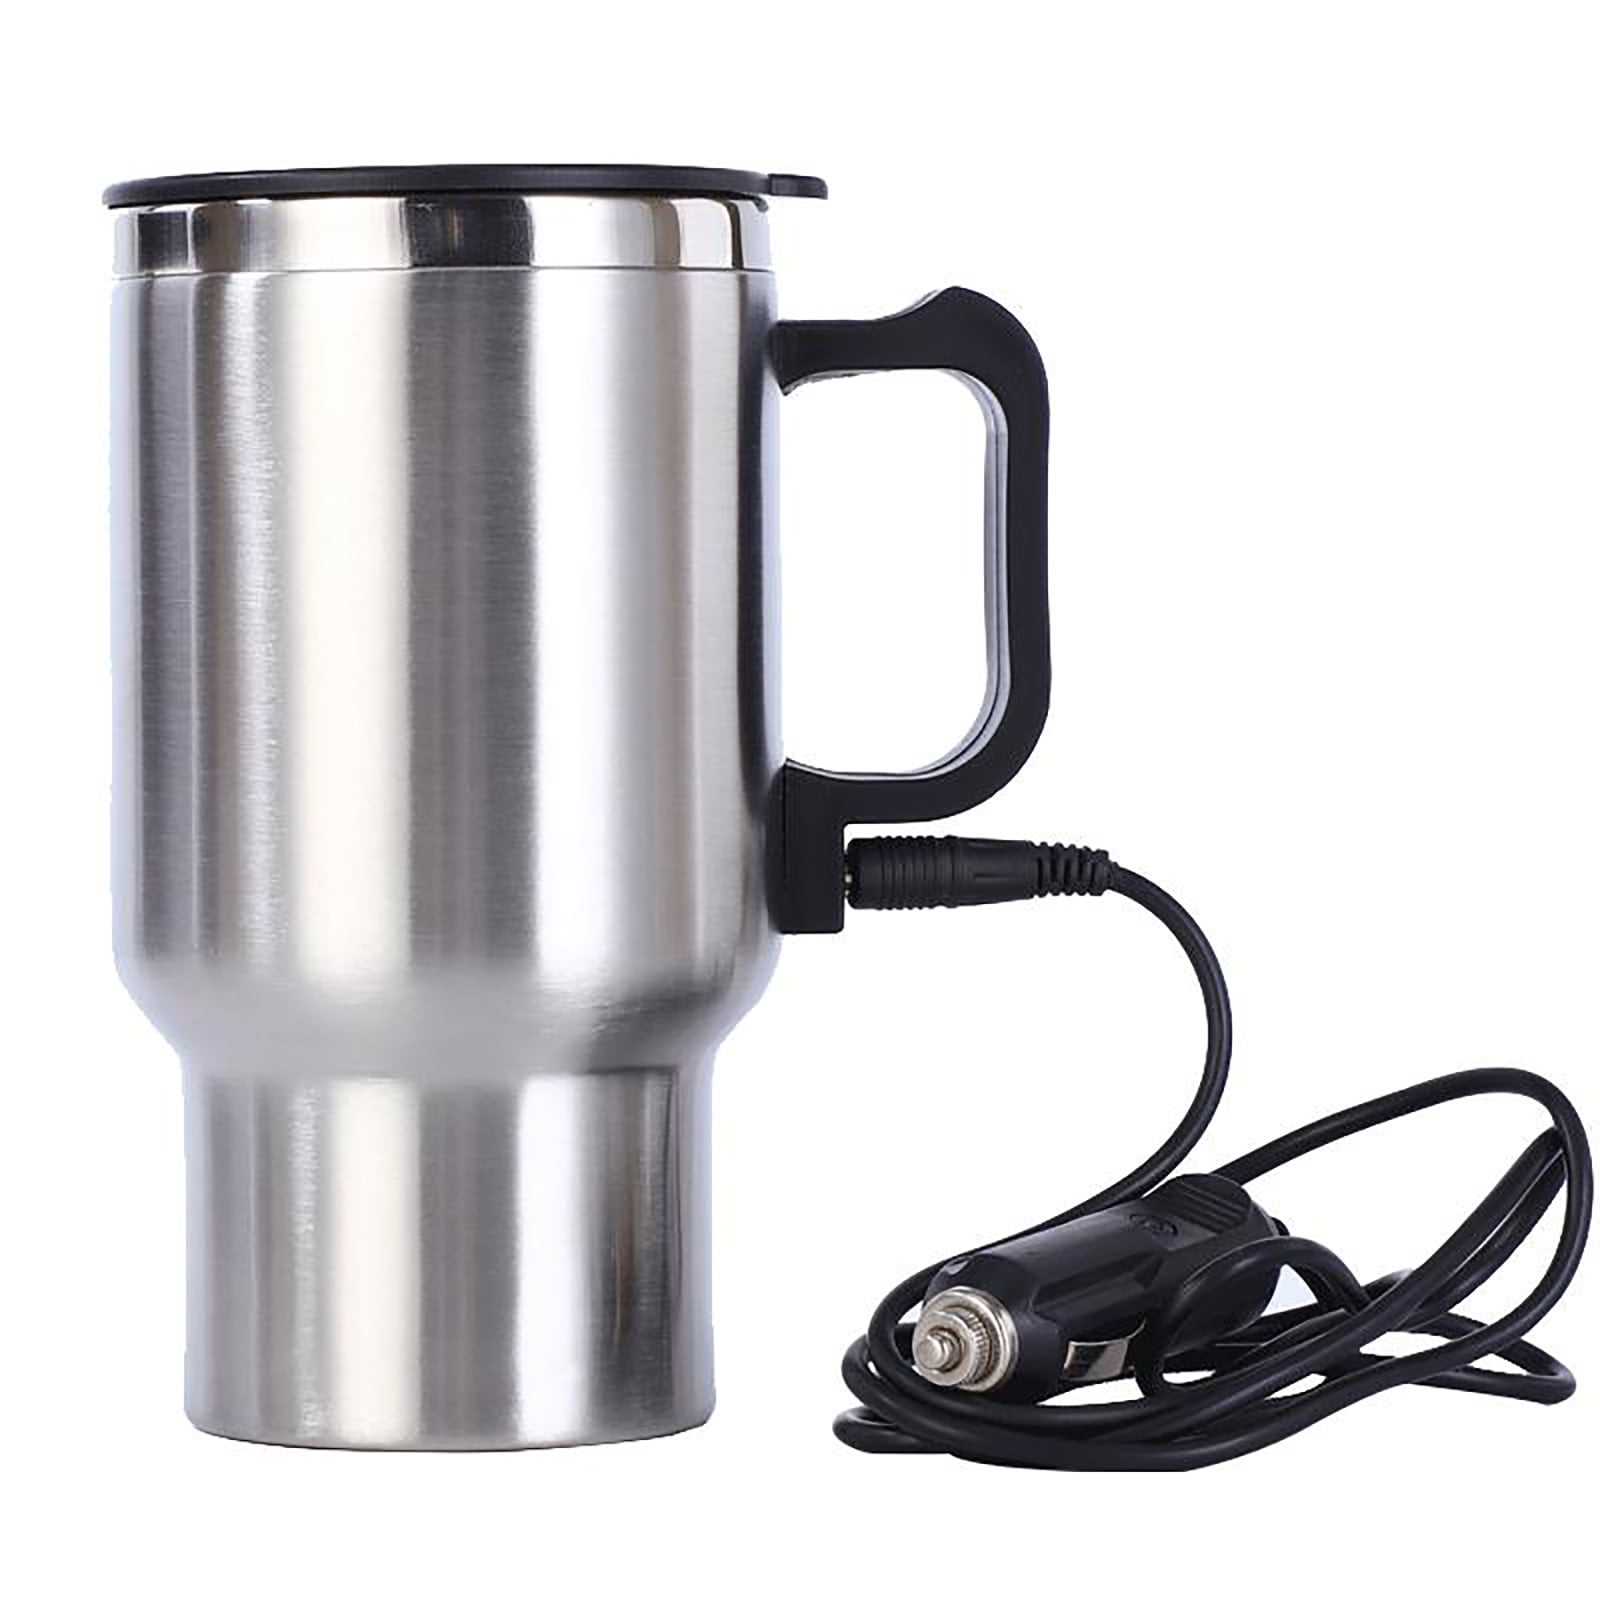 Smart Temperature Control Travel Coffee Mug Warmer 12/24V Portable Electric  Car Heating Cup Travel Cup 304 Stainless Steel 450ml Car Water Bottle Easy  to Clean Can heat Coffee, Tea, Milk, etc. 